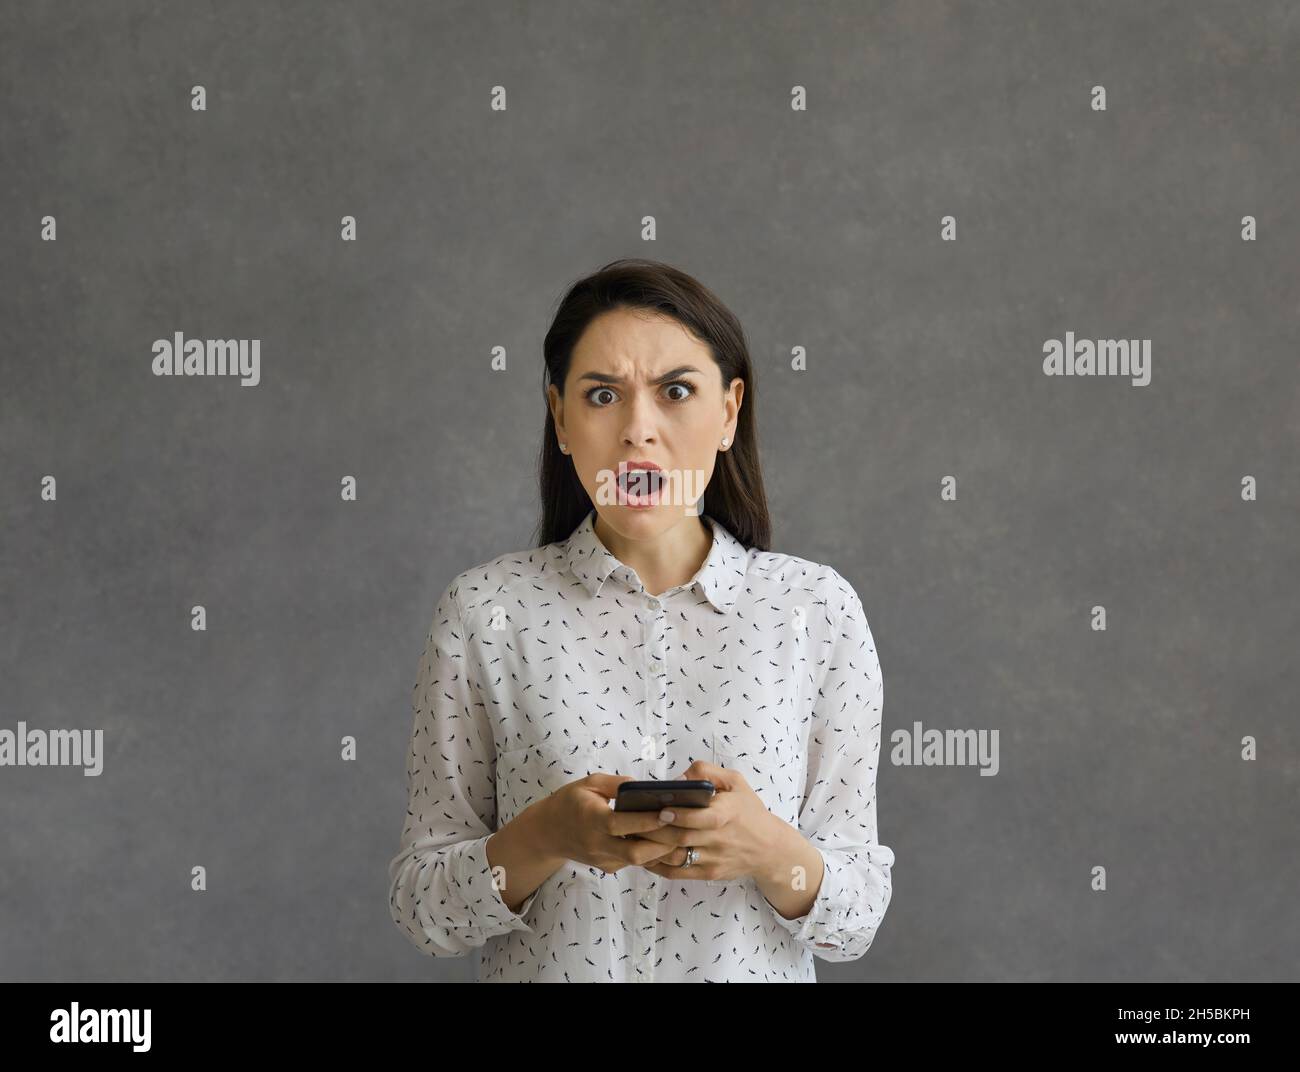 Frustrated and angry woman with dissatisfied facial expression stands with phone in hands. Stock Photo